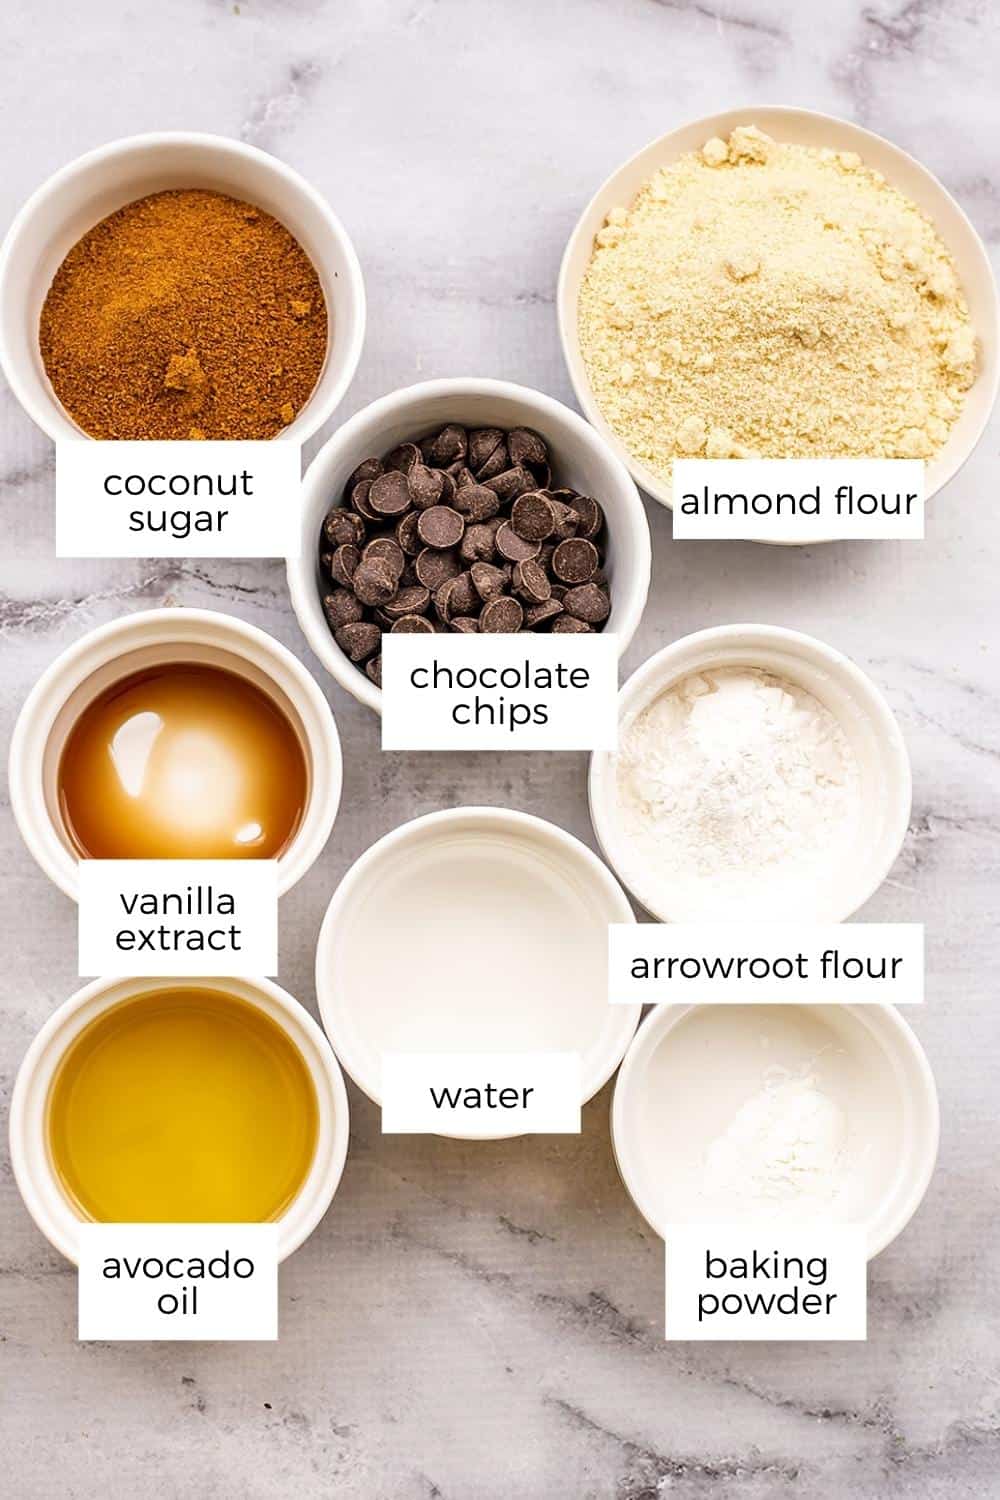 Ingredients to make double chocolate chip cookies.